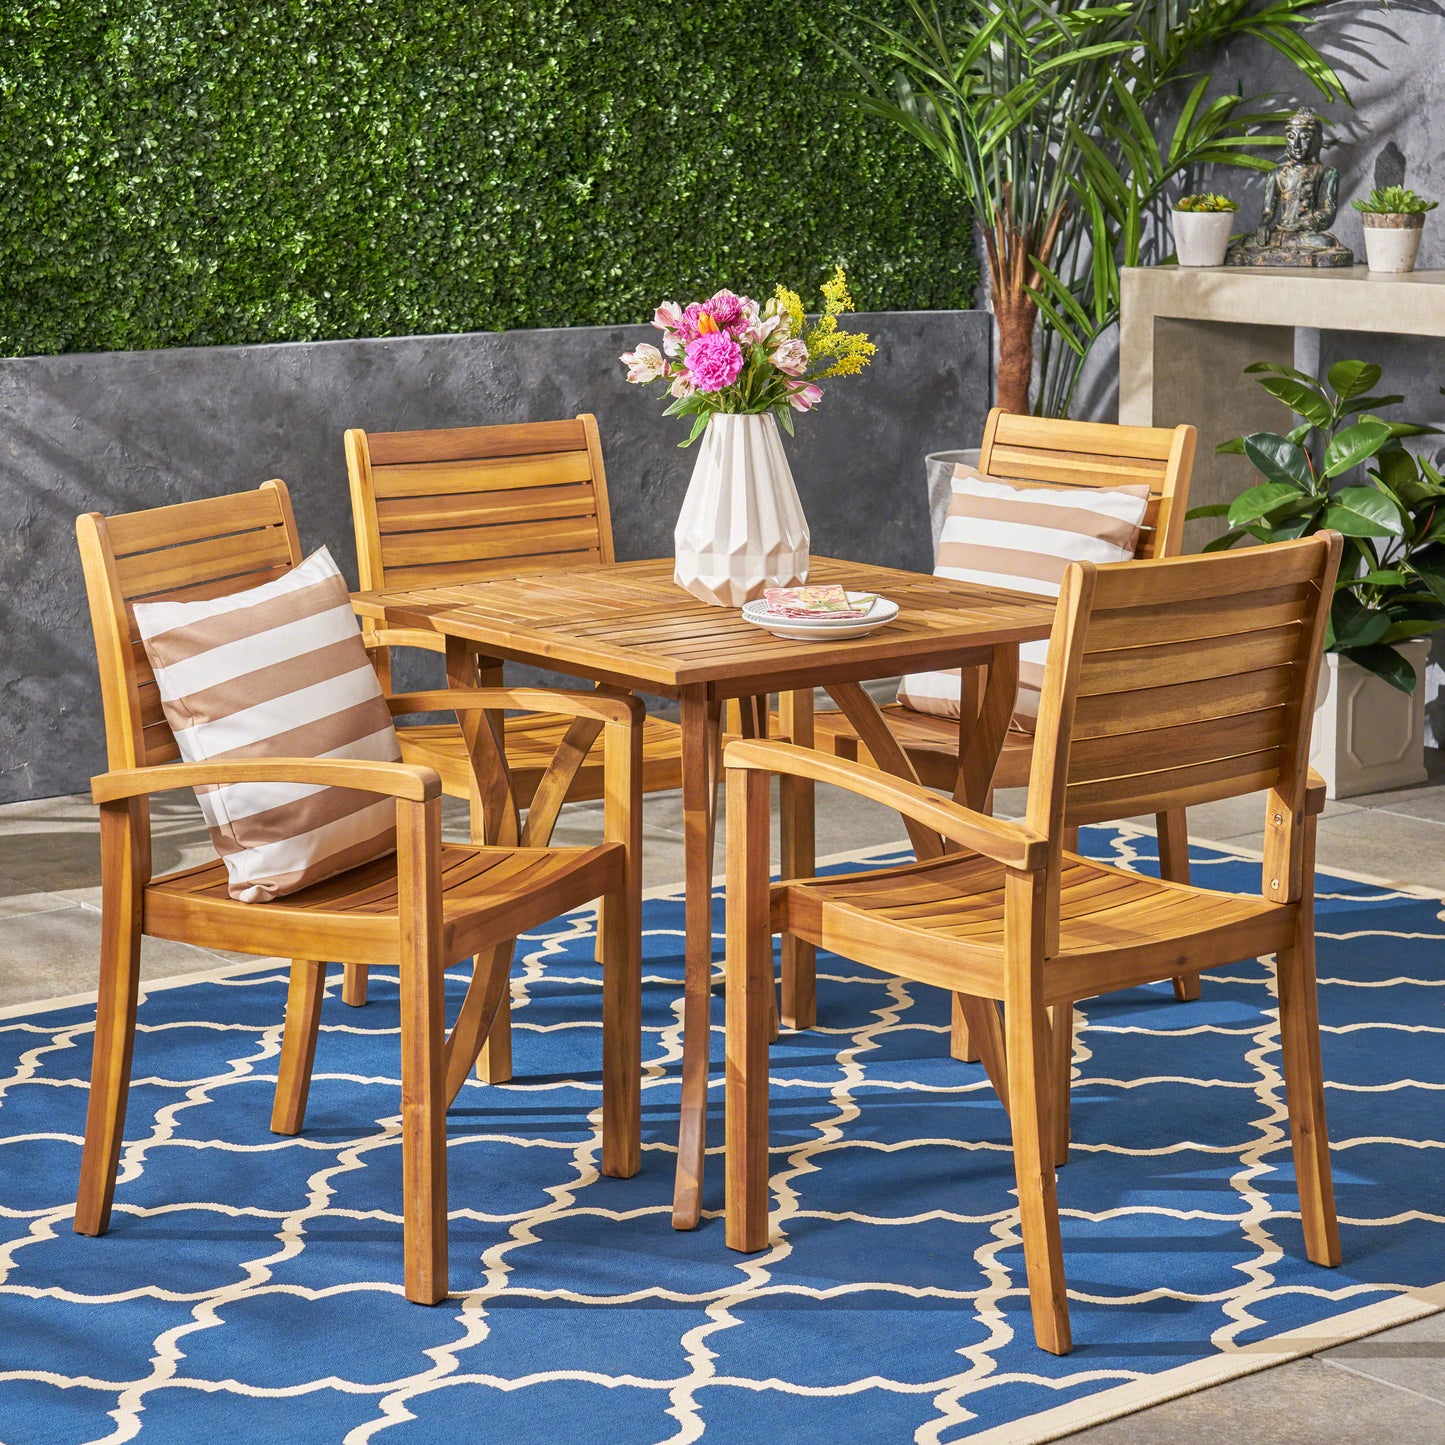 Carr Outdoor 4-Seater Square Acacia Wood Dining Set